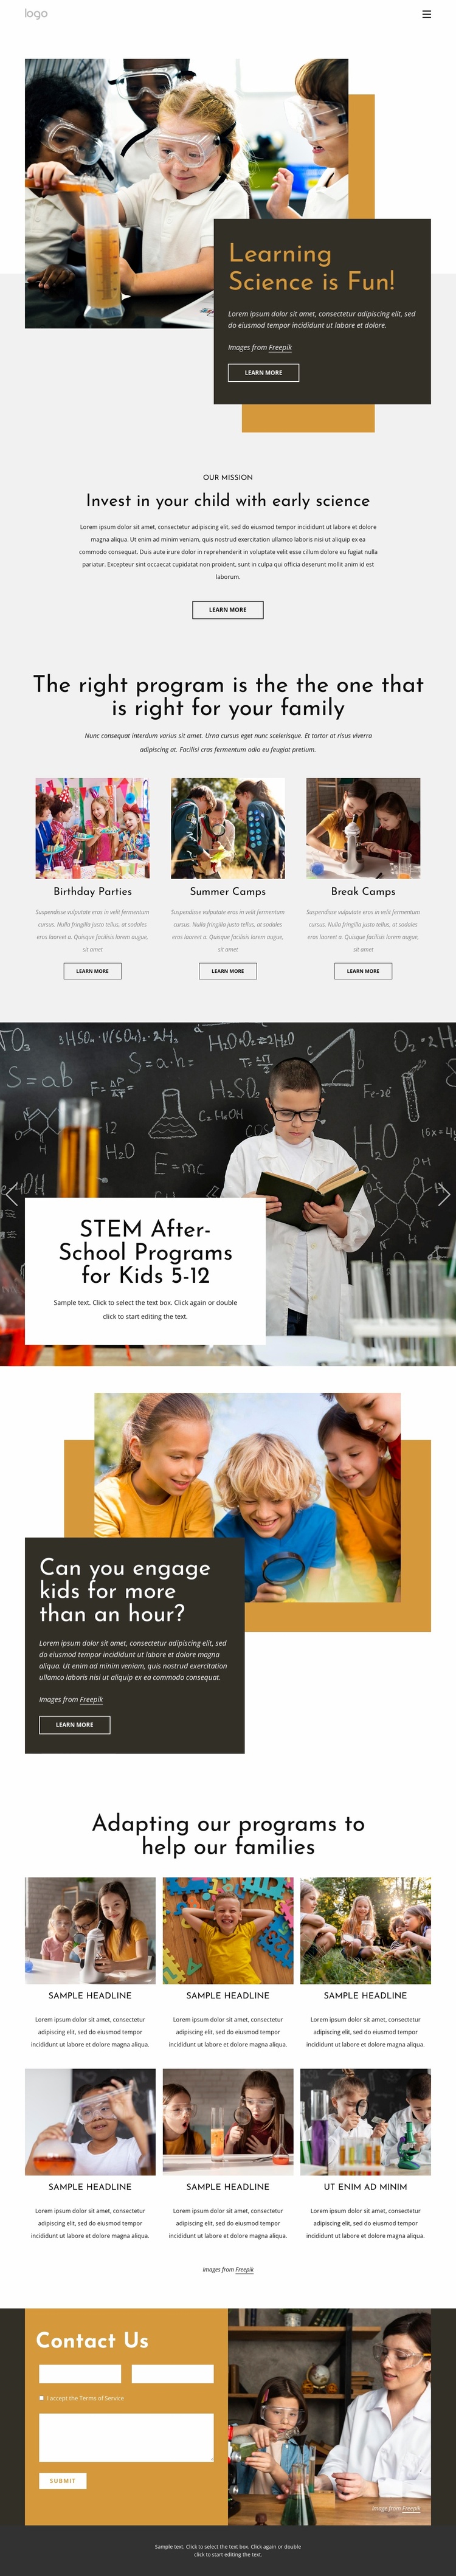 Learning science is fun Landing Page